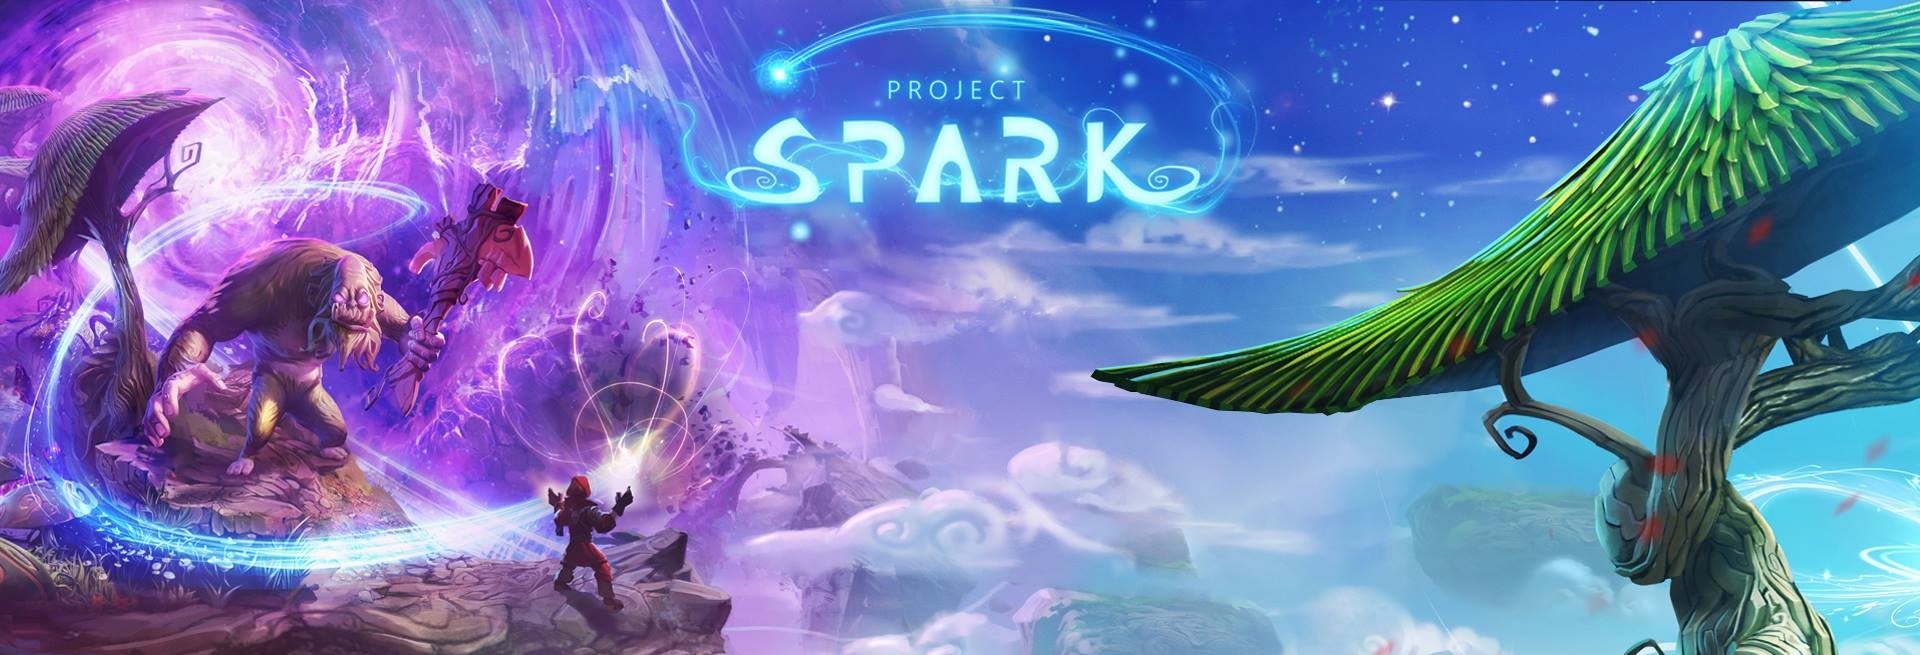 Project Spark image